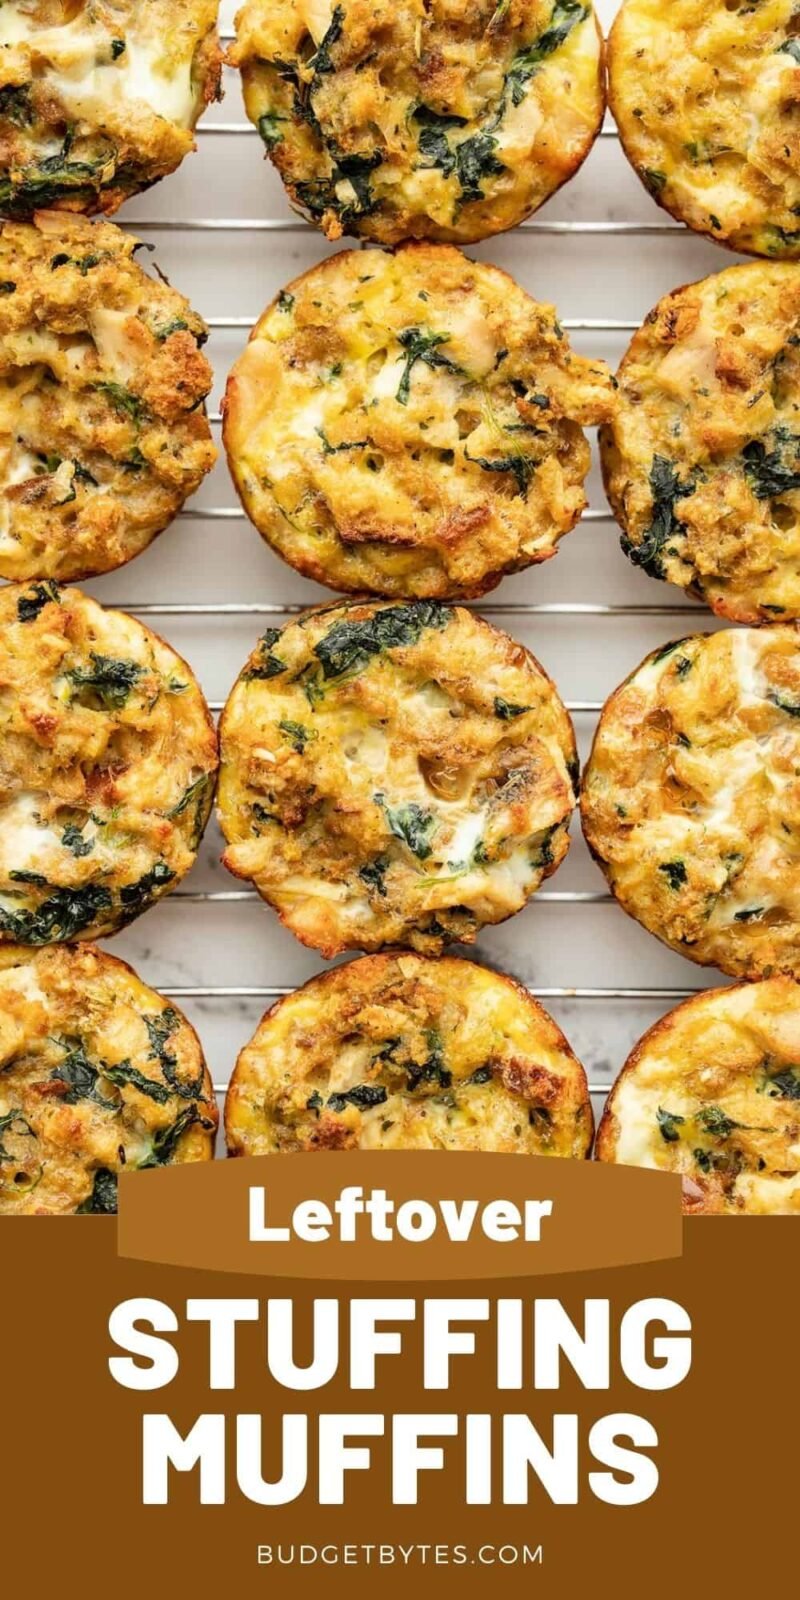 close up of stuffing muffins on a cooling rack, title text at the bottom